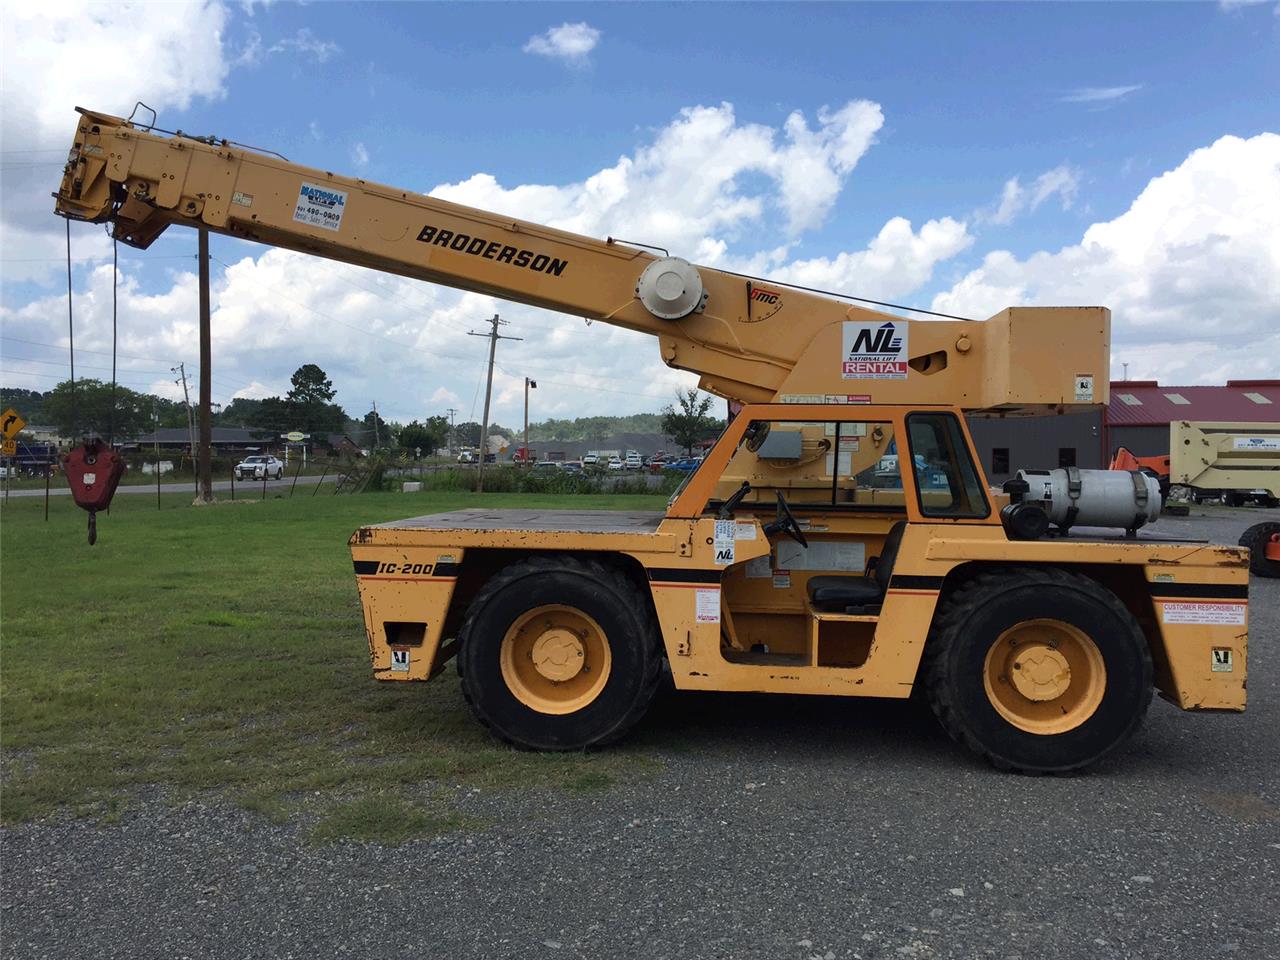 Broderson IC-200-3F mobile industrial deck crane , New Used Rental Forklift Rental Boom Lift Rental Lift Truck Rental Scissor Lift Rent Service Haul For Hire Industrial Batteries For Sale Chargers Storage Training Warehouse Lift Truck Forklift Lift Rental For Sale